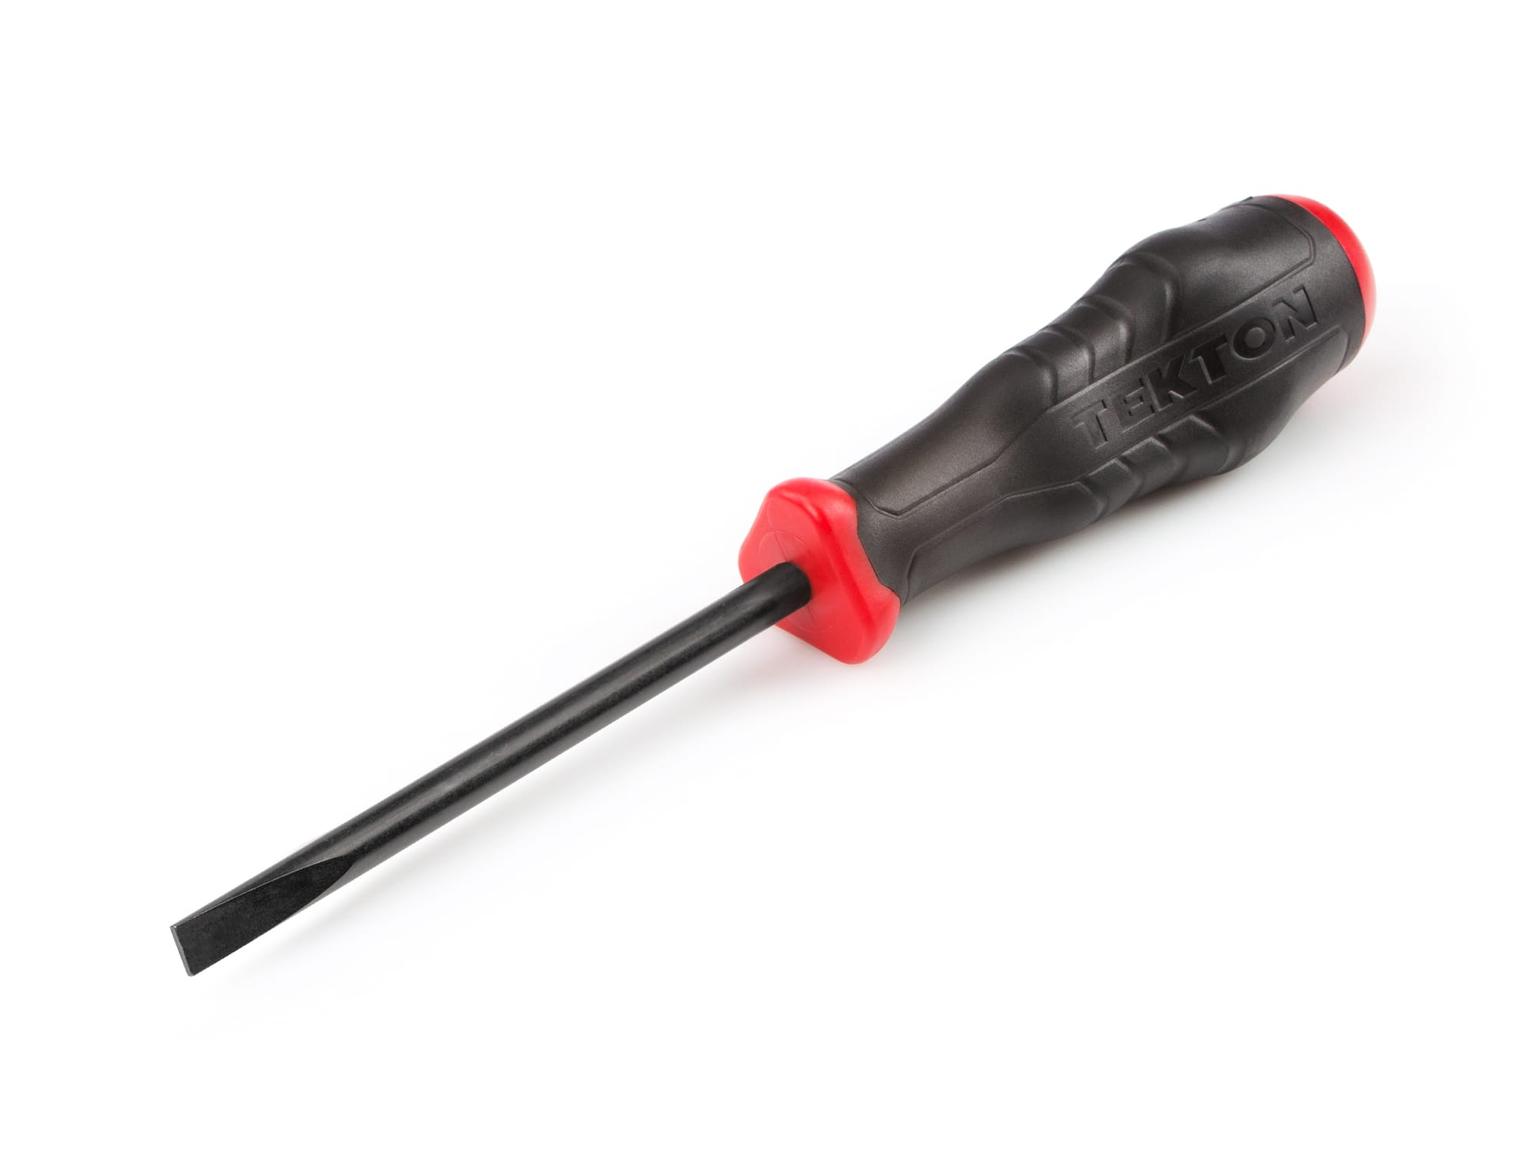 TEKTON DHE11250-T 1/4 Inch Slotted High-Torque Black Oxide Blade Screwdriver